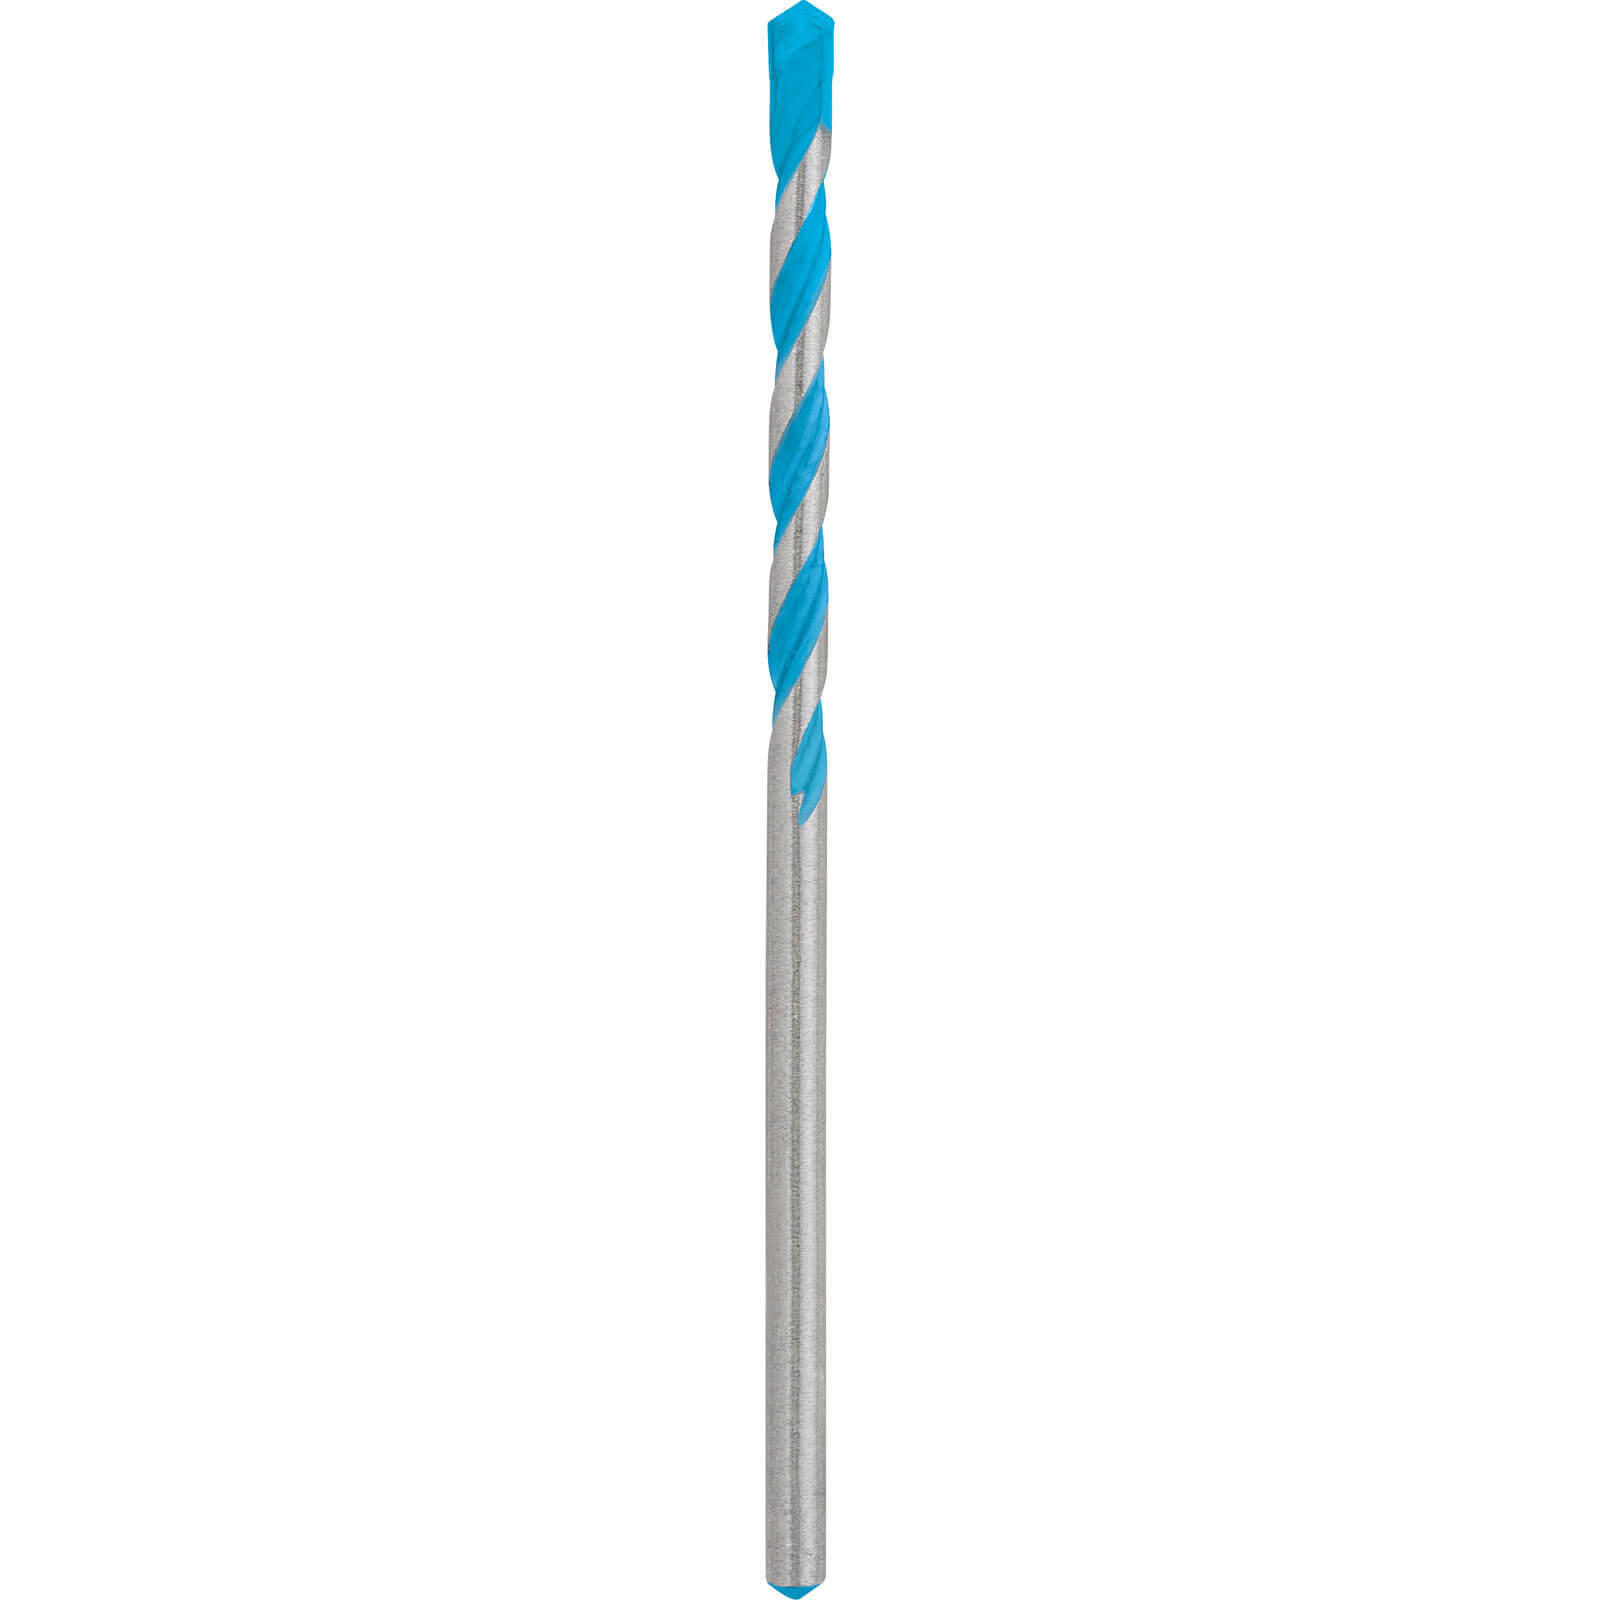 Photo of Bosch Expert Cyl-9 Multi Construction Drill Bit 6mm 250mm Pack Of 1